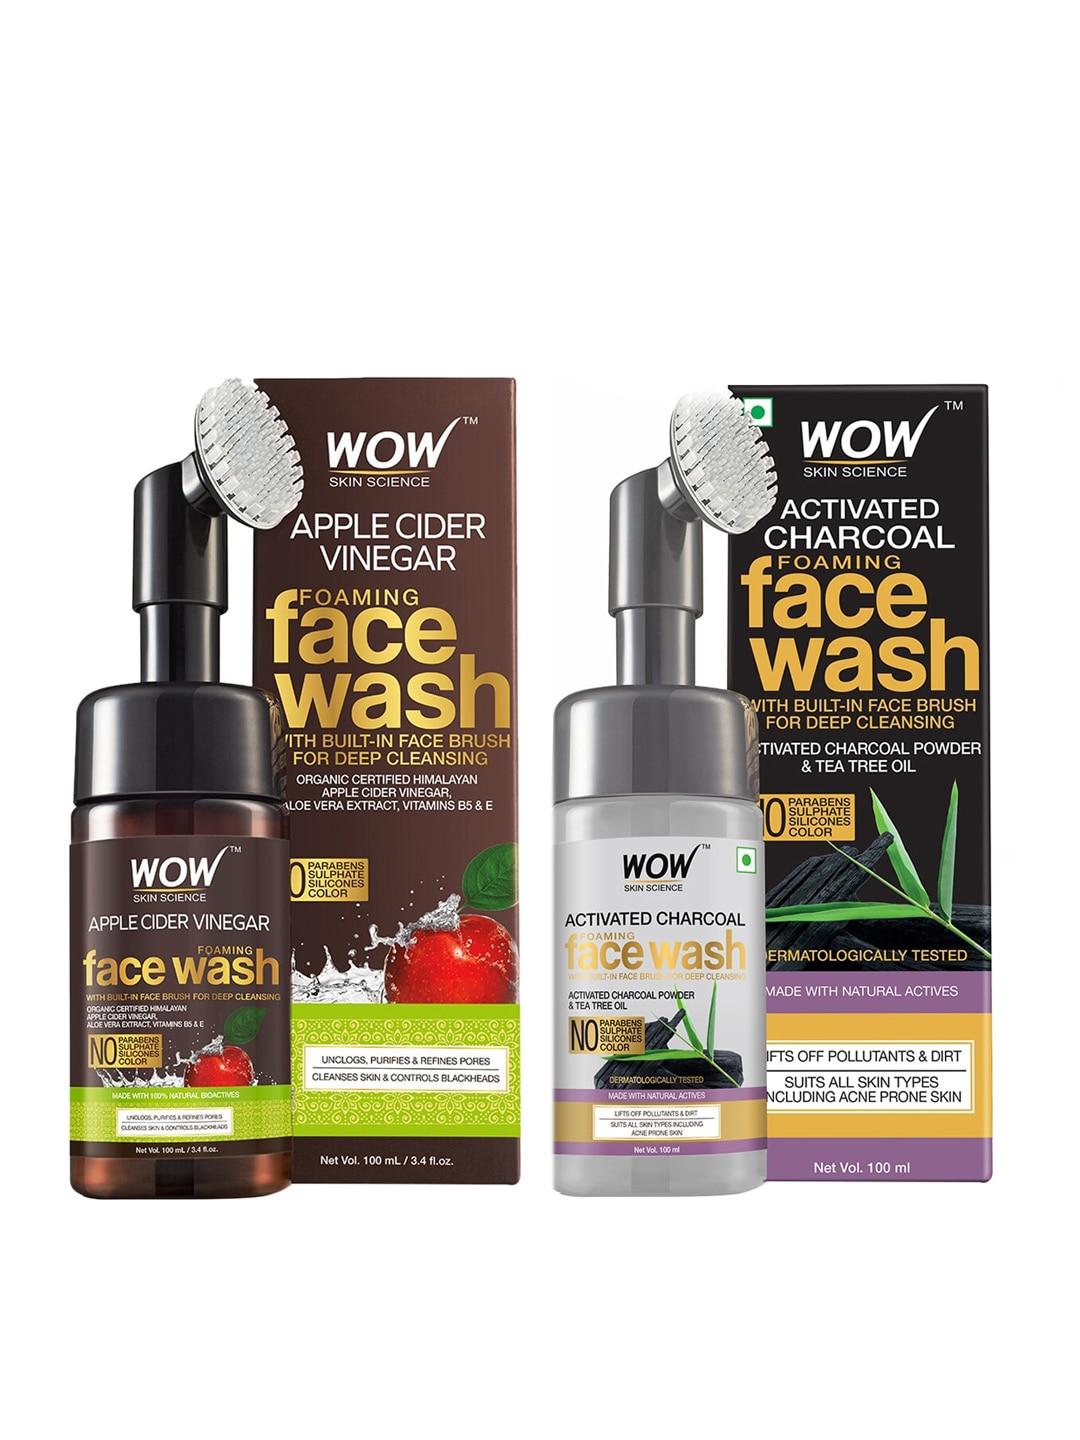 wow-skin-science-unisex-set-of-2-foaming-face-washes